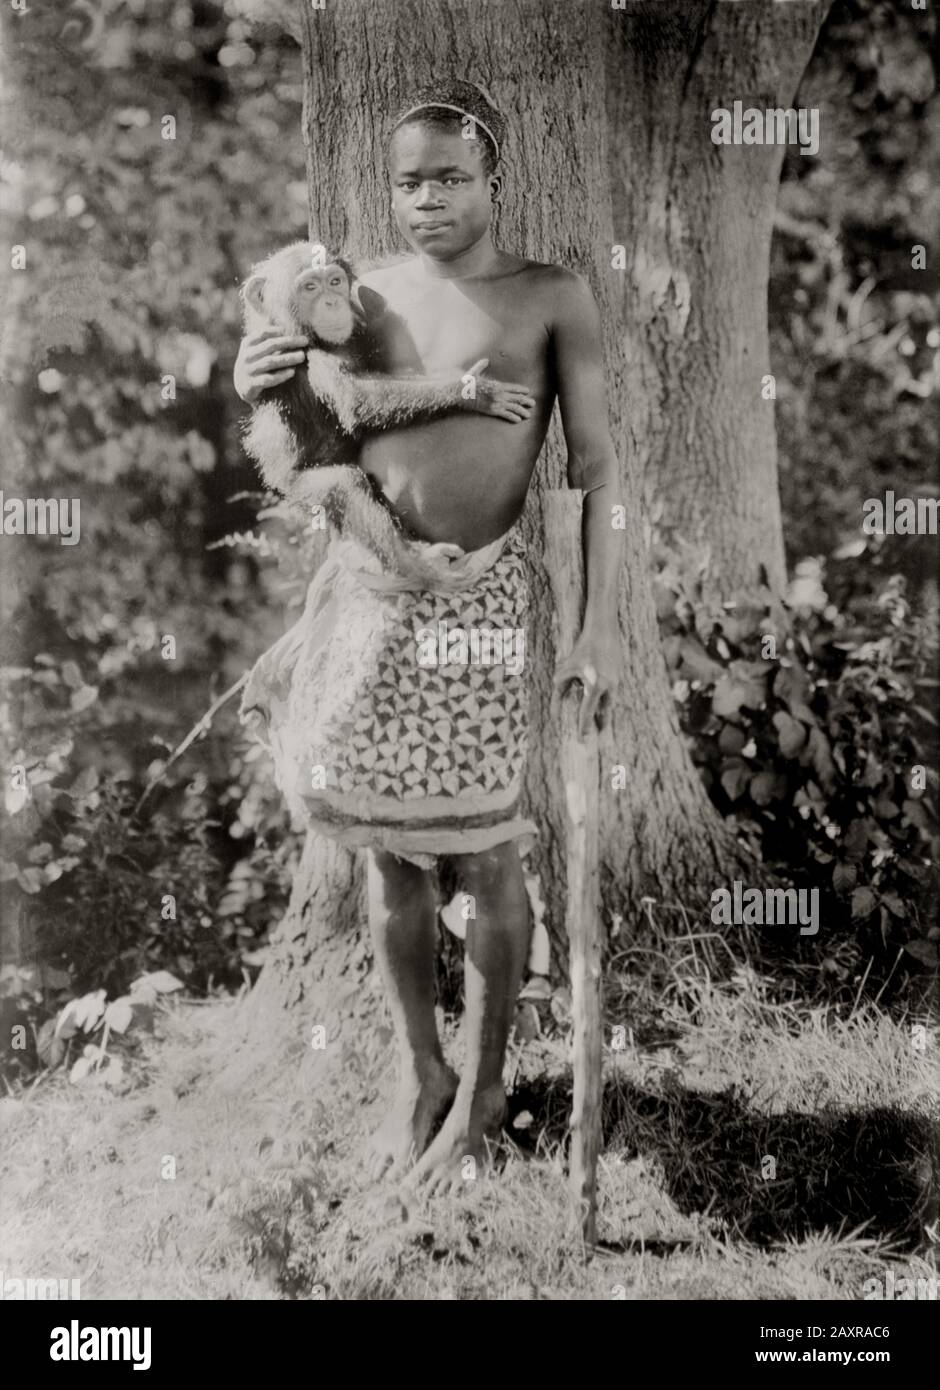 1906, New York , USA :  OTA BENGA ( 1883 ca - 1916 ), was a young Pygmy Mbuti from the african Congo who was brought when was a boy to the U.S. for the 1904 World's Fair held in St. Louis, Missouri . Unable to return to Africa in 1916 during the World War I  he became depressed and committed suicide the day 20 march 1916 , aged 33 .  Benga had been purchased from African slave traders by the missionary and anthropologist Samuel Phillips Verner . - FOTO STORICHE - HISTORY  - portrait - ritratto - MODELLO - MODEL  -  piedi nudi - barefoots - monkey - scimmia - scimpanzé - PIGMEO - PIGMEI - suici Stock Photo